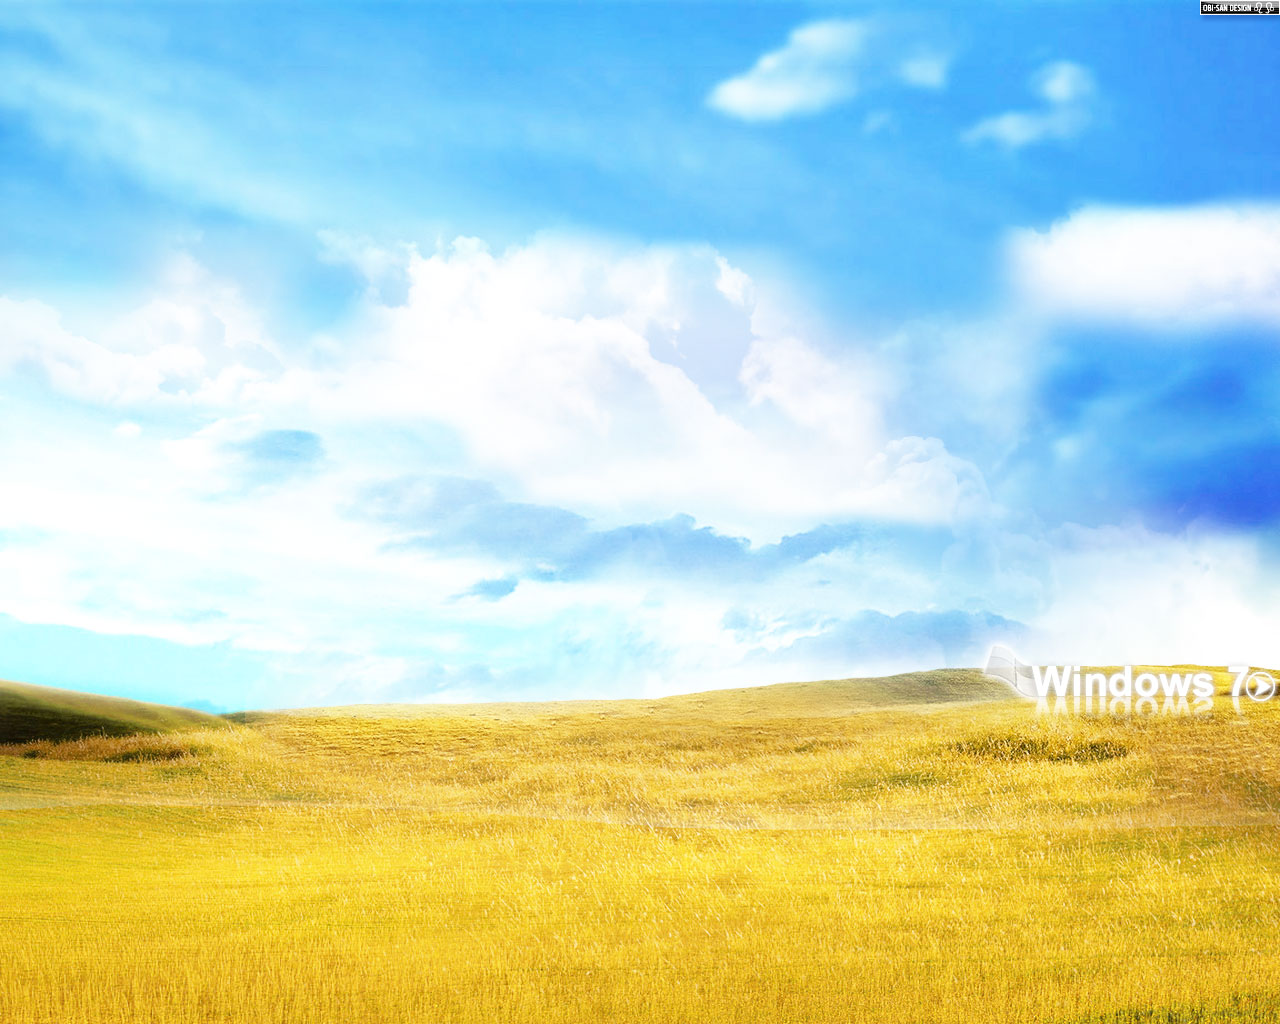 Panoramic Wallpaper of Windows 7 Images Gallery 1280x1024